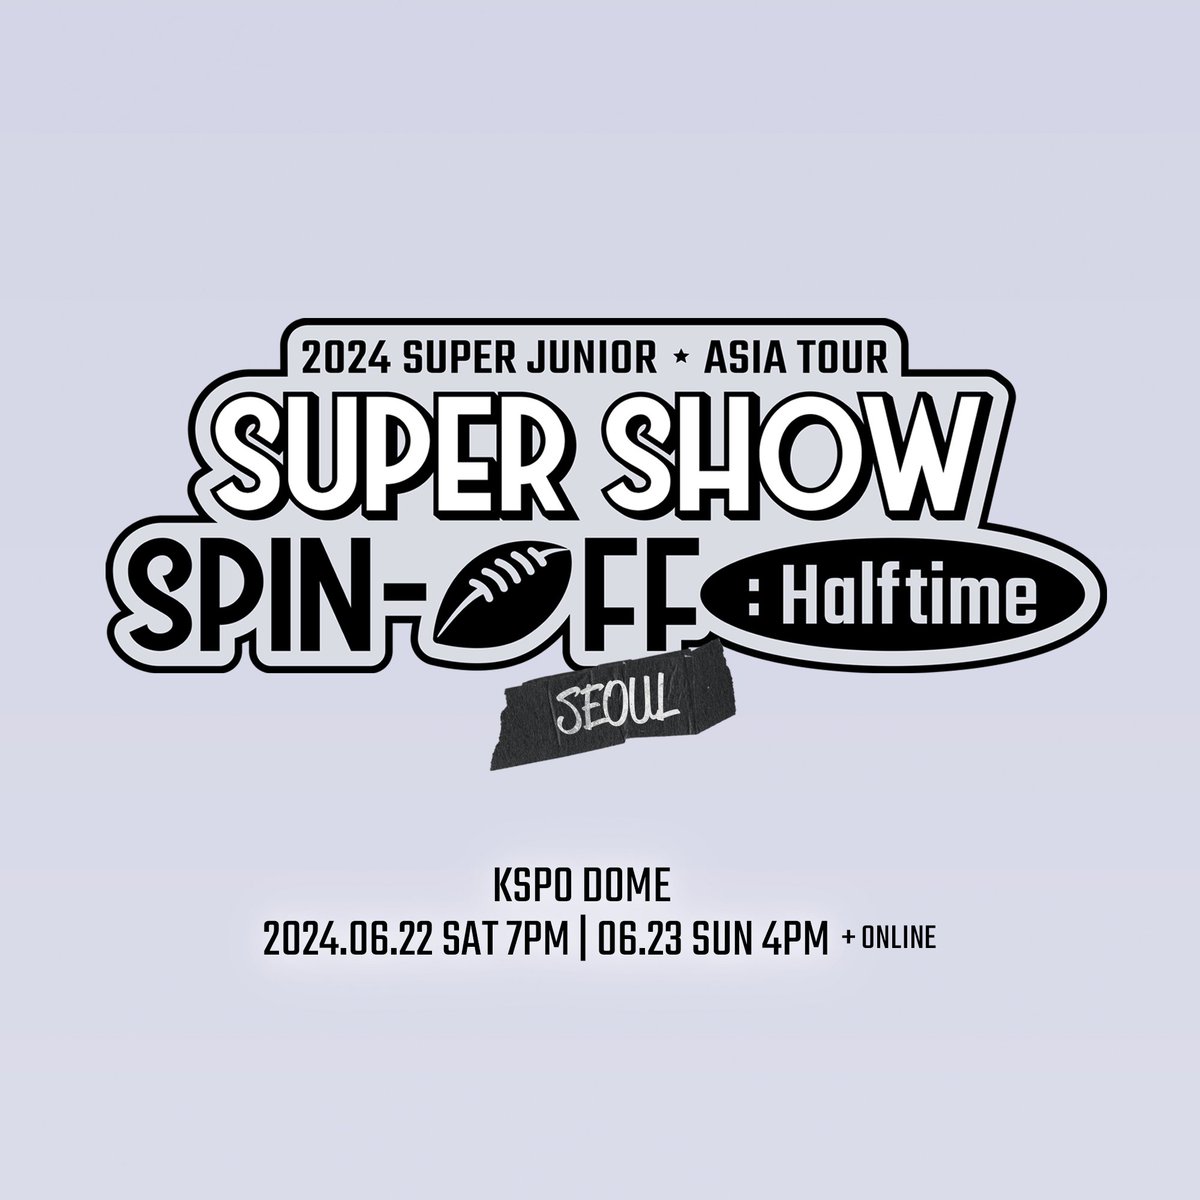 2024 SUPER JUNIOR <SUPER SHOW SPIN-OFF : Halftime> in SEOUL 시야제한석 추가 오픈 안내 🎉 (Additional Ticket Opening of Obstructed View Seats) 📅 2024.06.22(SAT) 7PM (KST) 📅 2024.06.23(SUN) 4PM (KST) 📍KSPO DOME 🎫 2024.05.13(MON) 8PM(KST) 🔗 bit.ly/3UvSCOe…